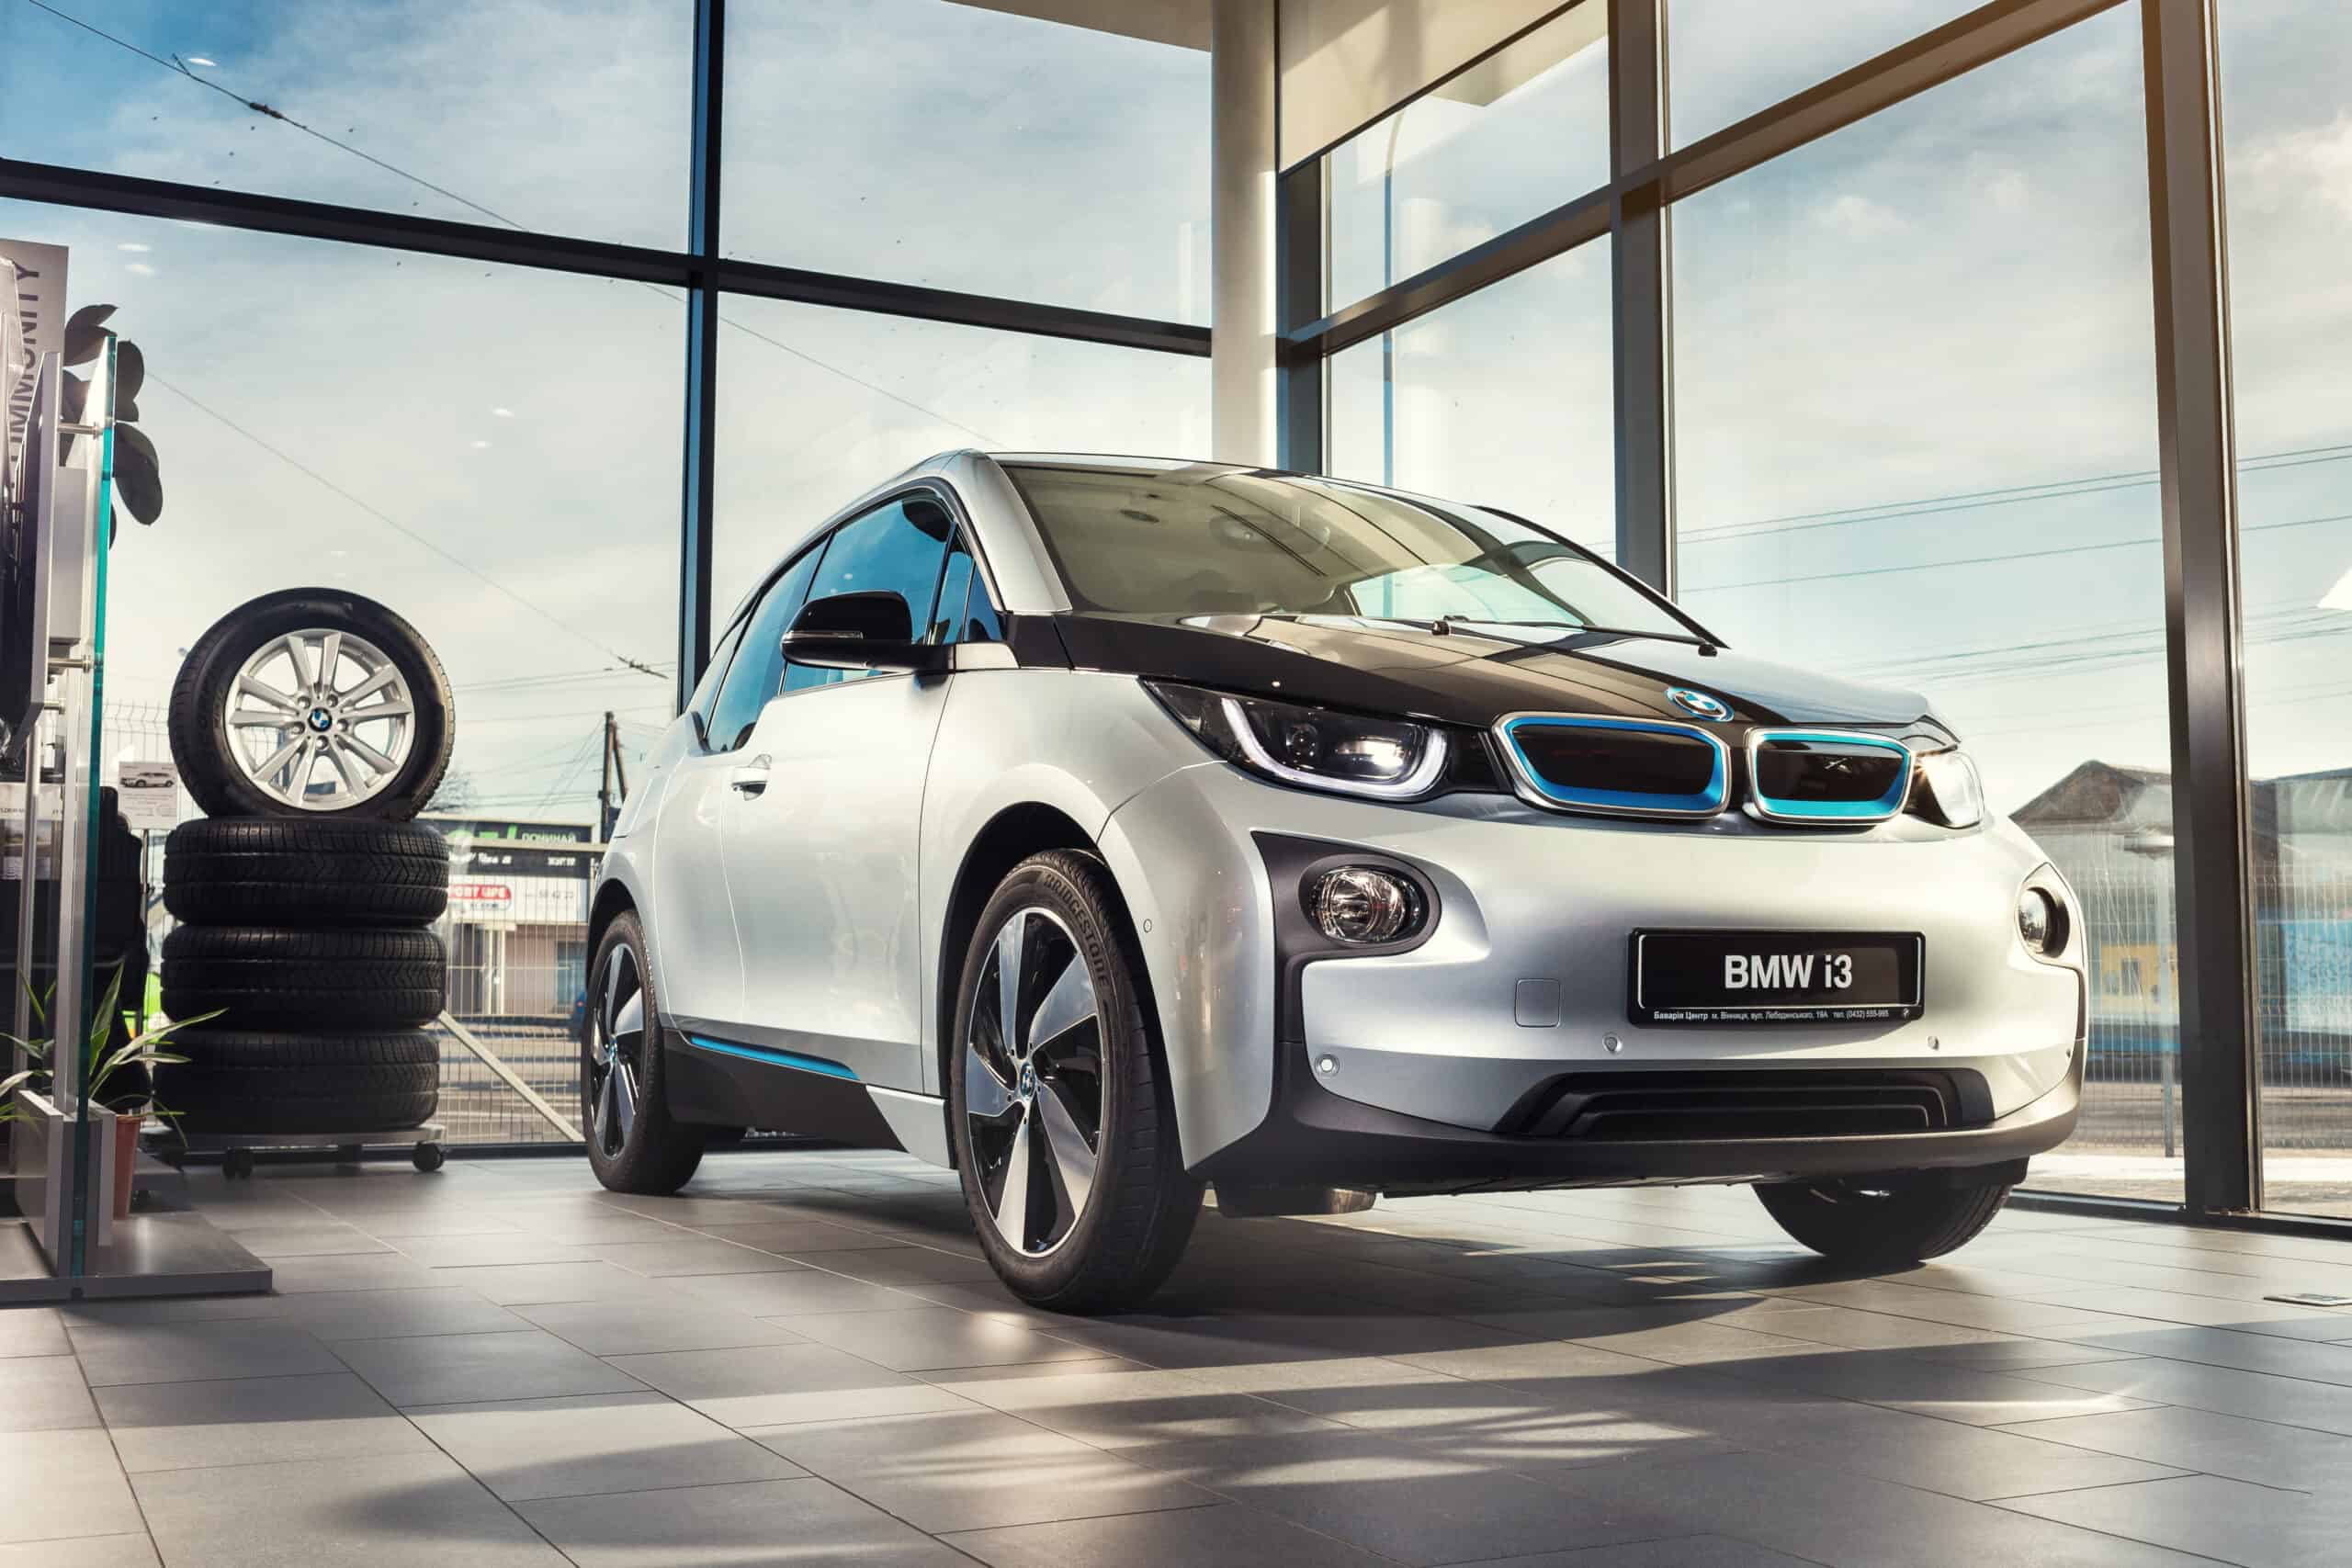 BMW i3 Production Comes To An End: 250,000 Were Made